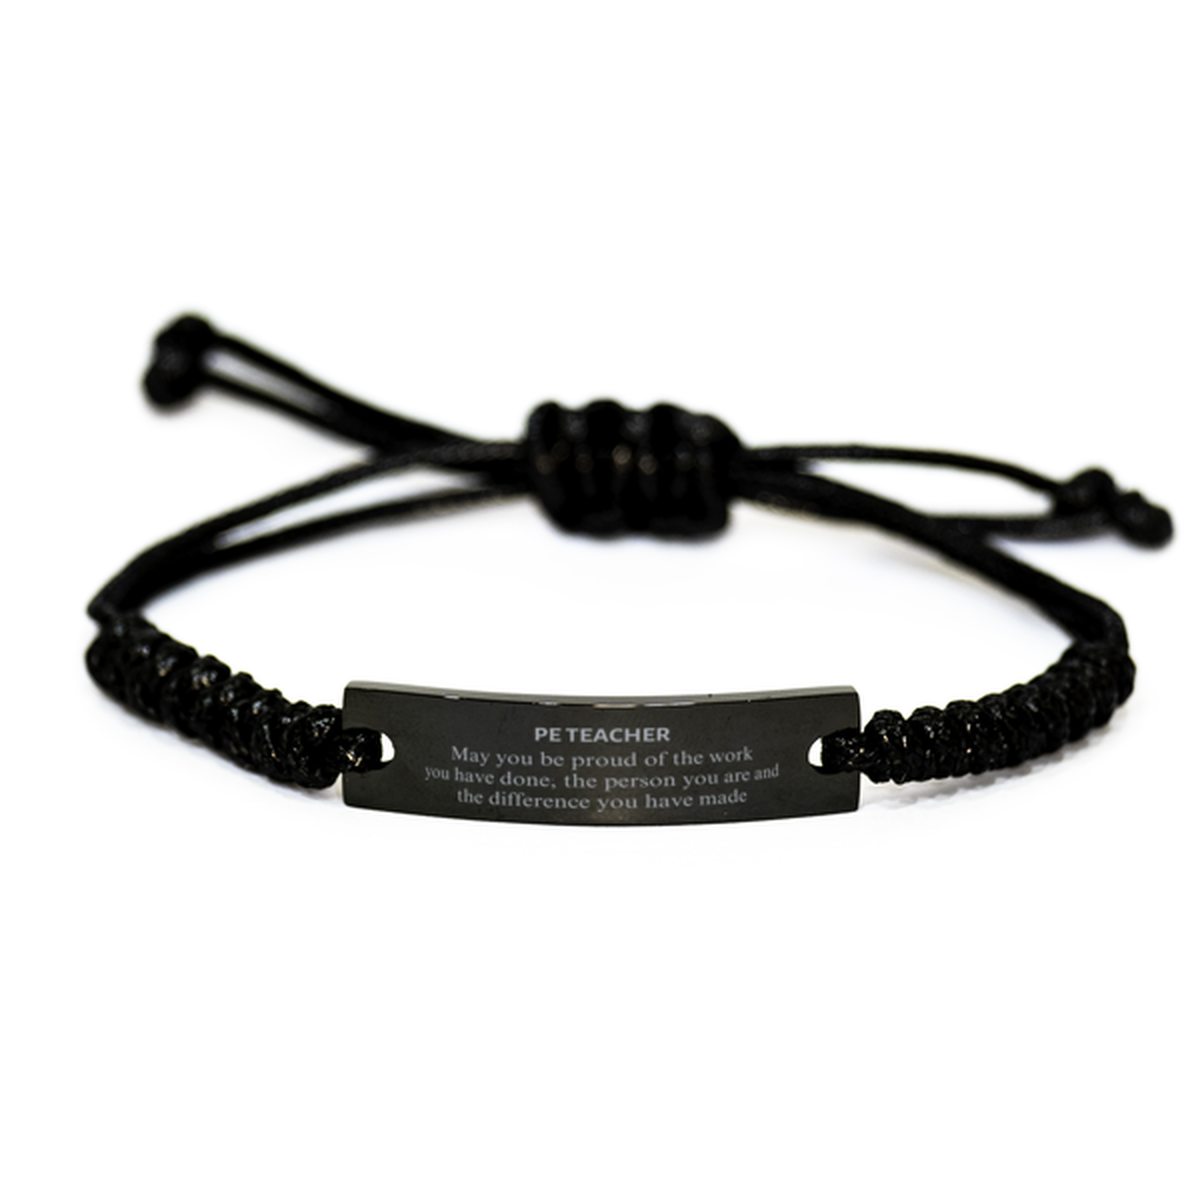 PE Teacher May you be proud of the work you have done, Retirement PE Teacher Black Rope Bracelet for Colleague Appreciation Gifts Amazing for PE Teacher